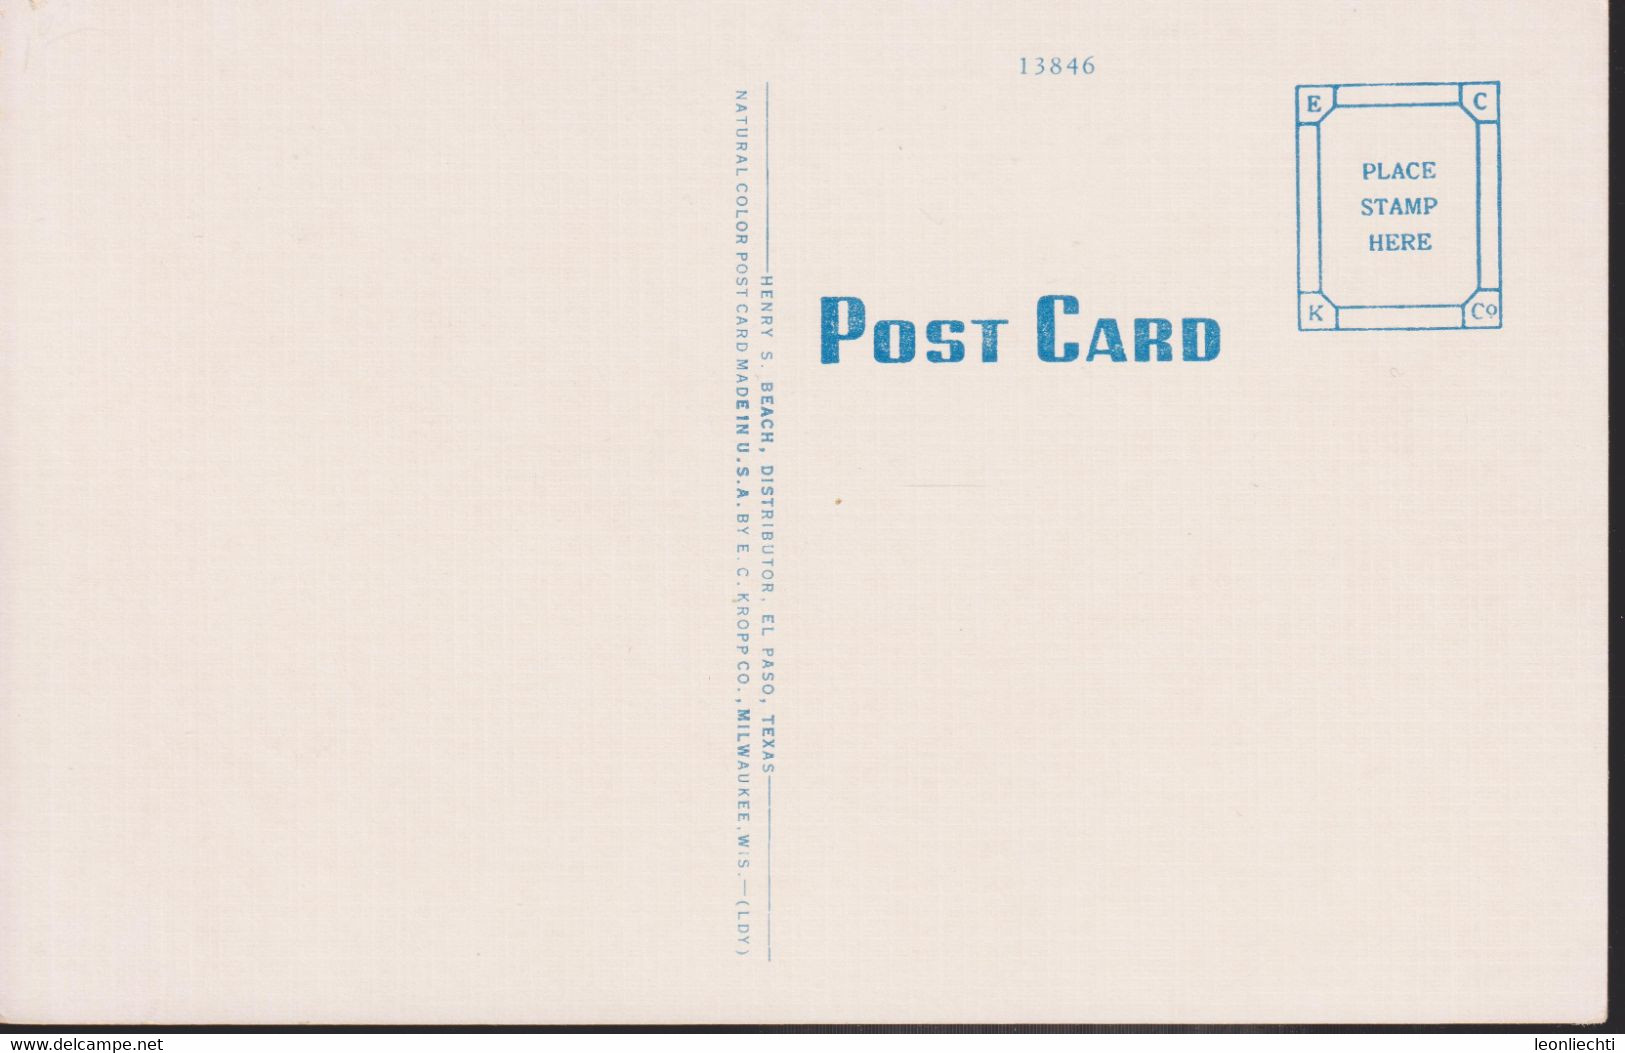 AK. POST CARD, MILLIS SREET, EL PASO, TEXAS. LOOKING WEST FROM UNITED STATES POST OFFICE - El Paso